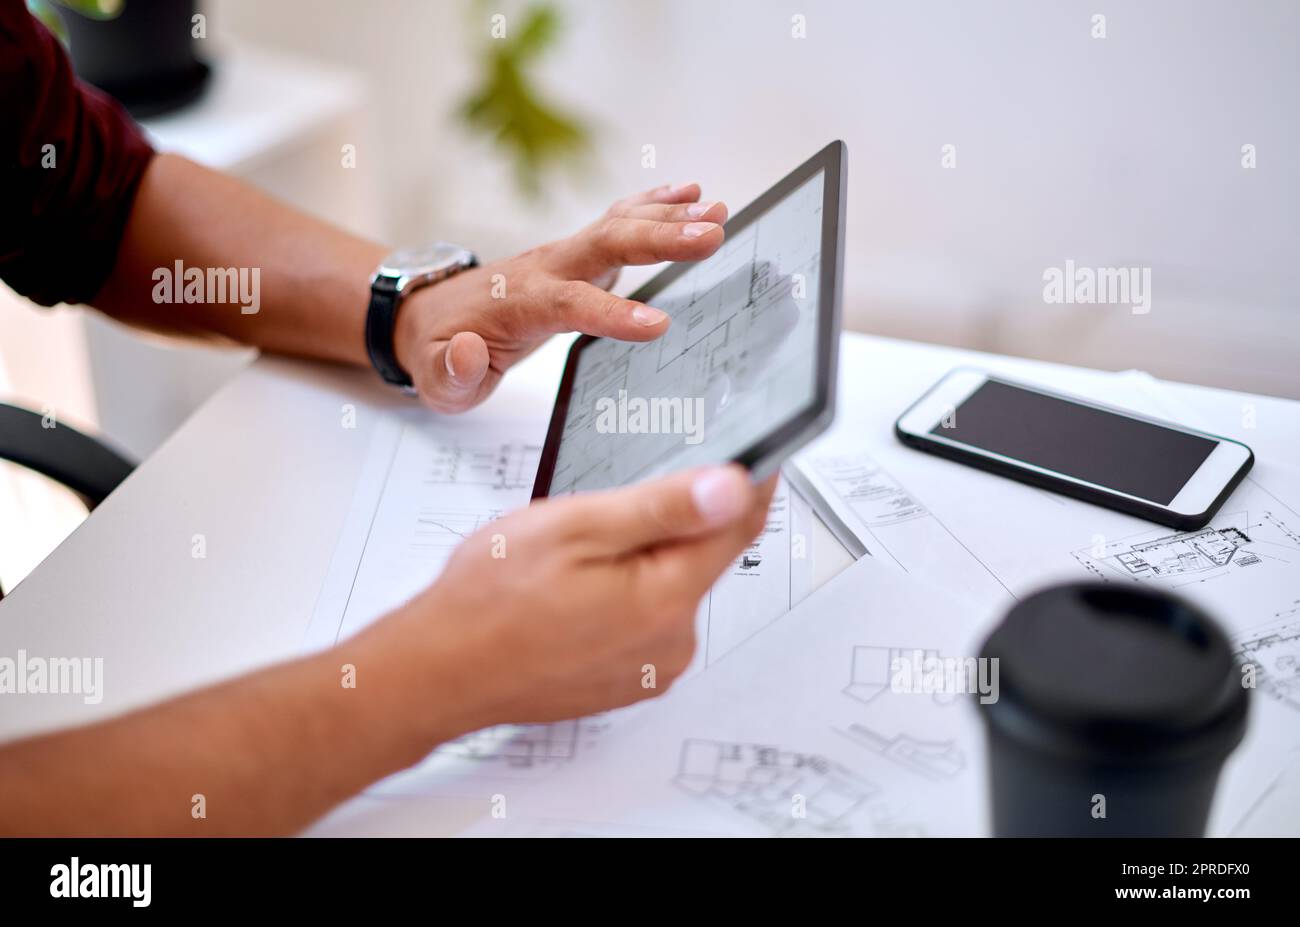 Drafting up something new. Closeup shot of an unrecognisable architect using a digital tablet in an office. Stock Photo